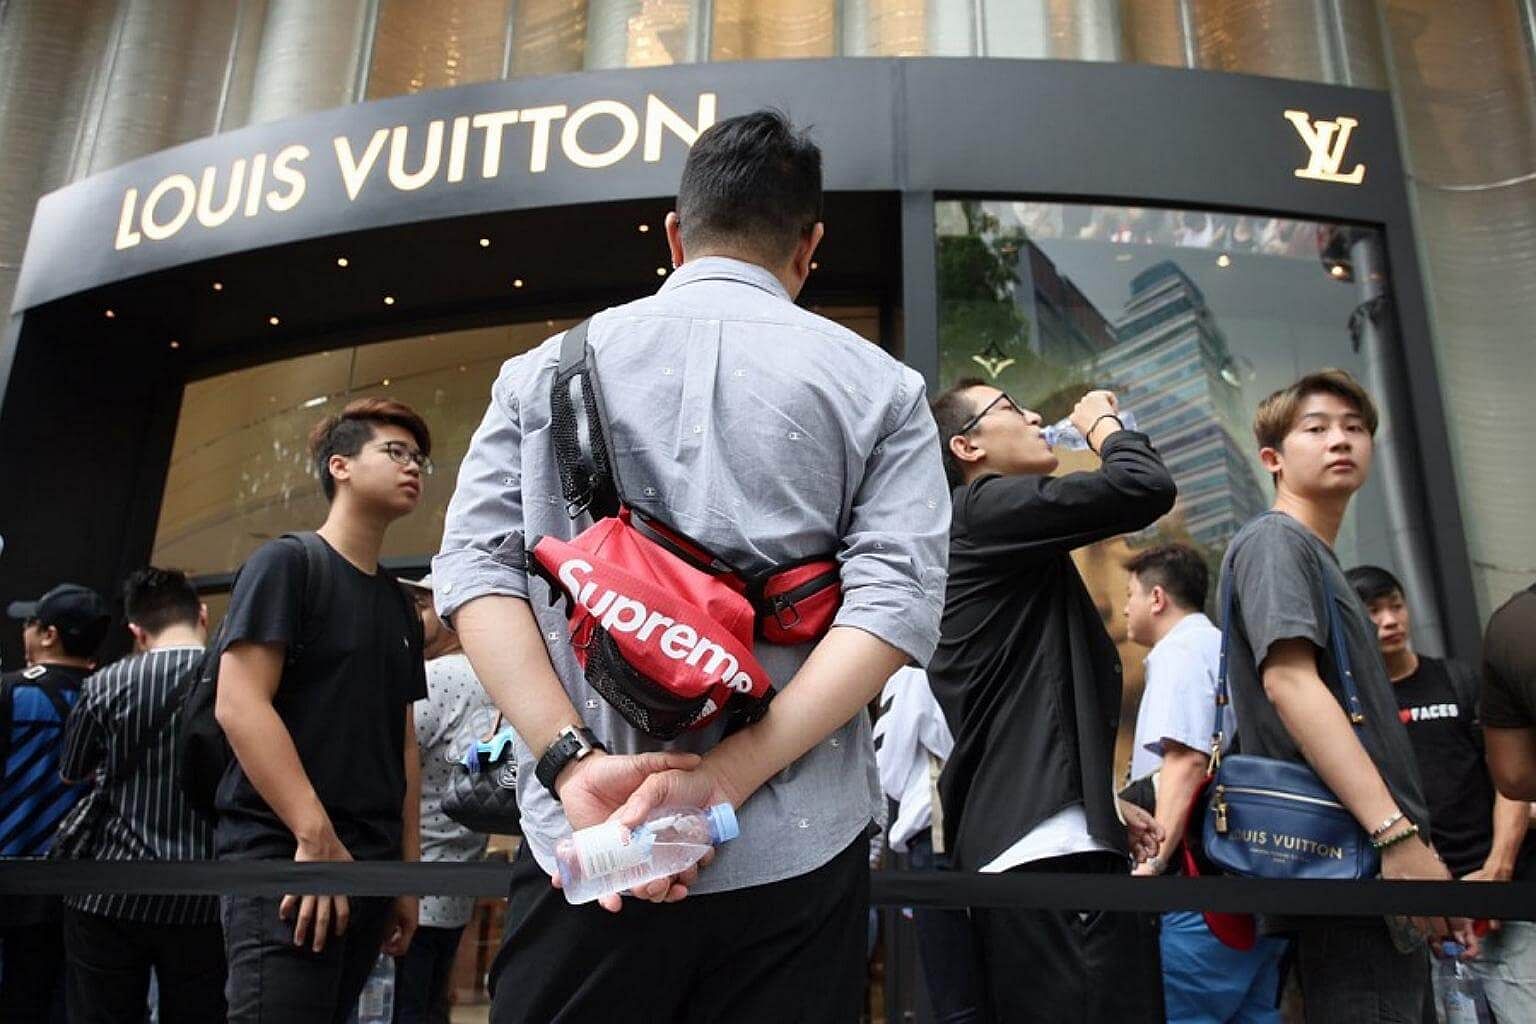 Get ready to wait in line: the Supreme x Louis Vuitton collaboration is  official